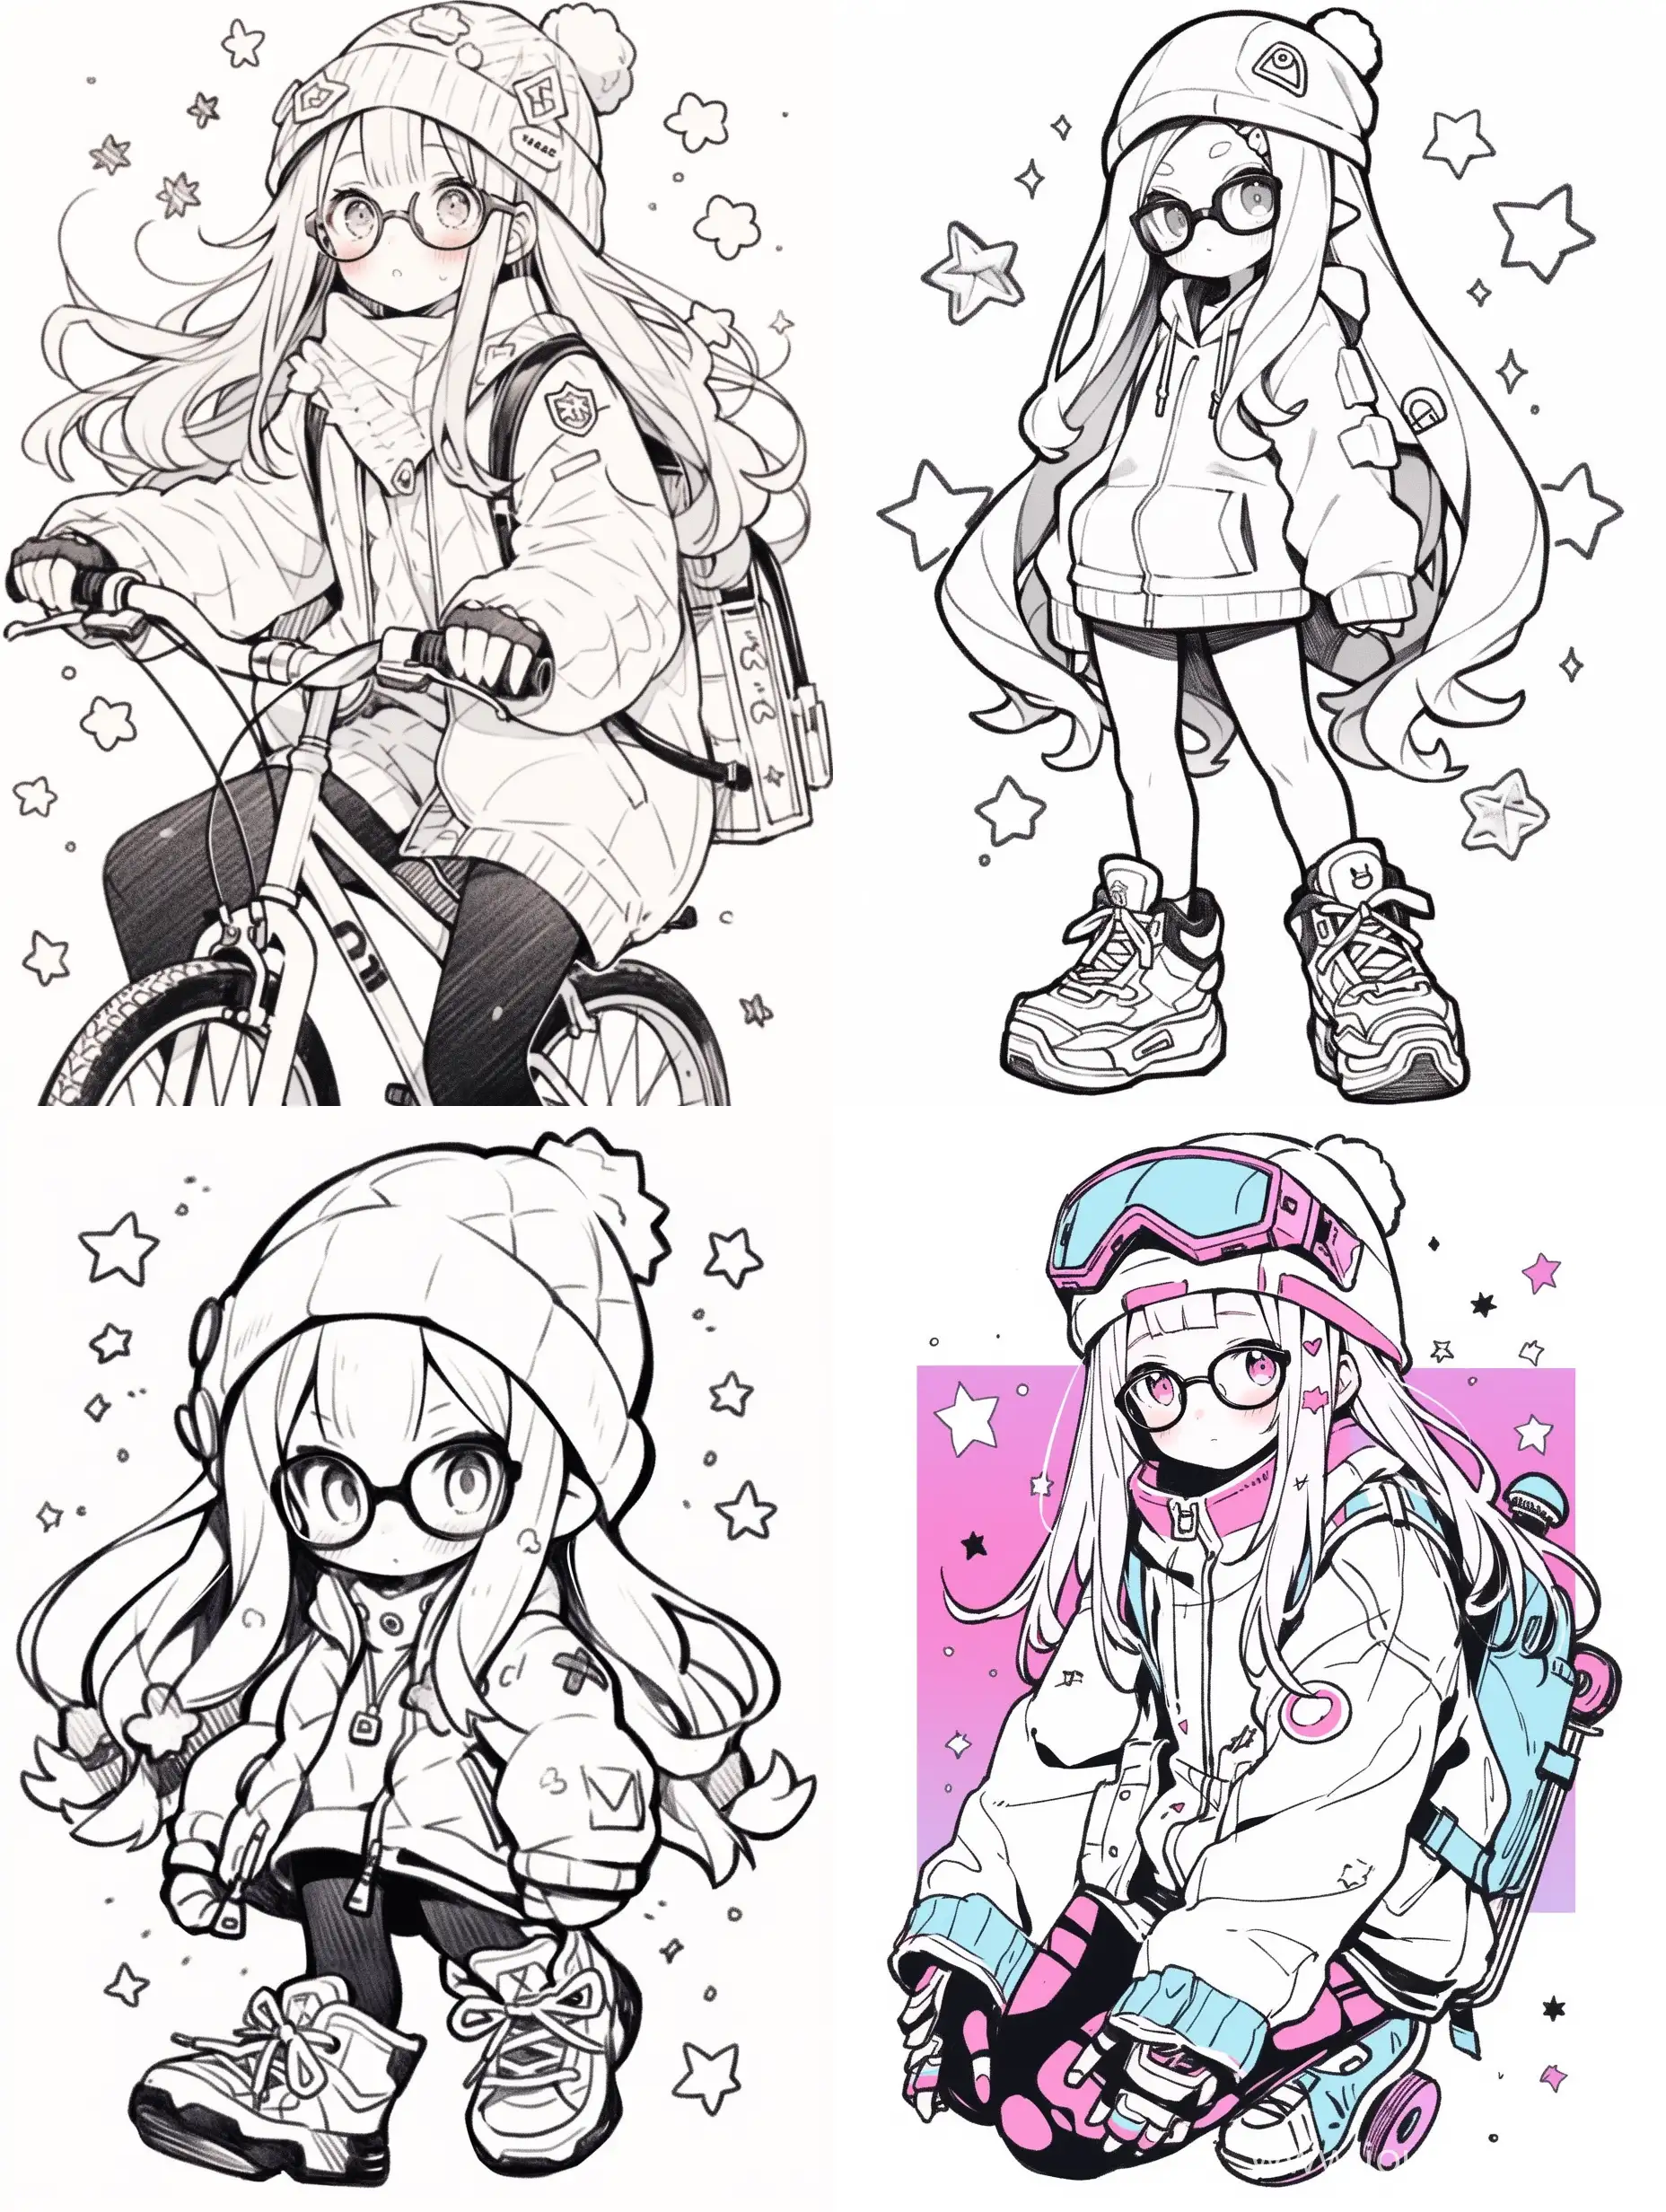 Chic-Anime-Girl-Coloring-Page-Stylish-Hoodie-Starry-Hair-Clips-and-Bicycle-Adventure